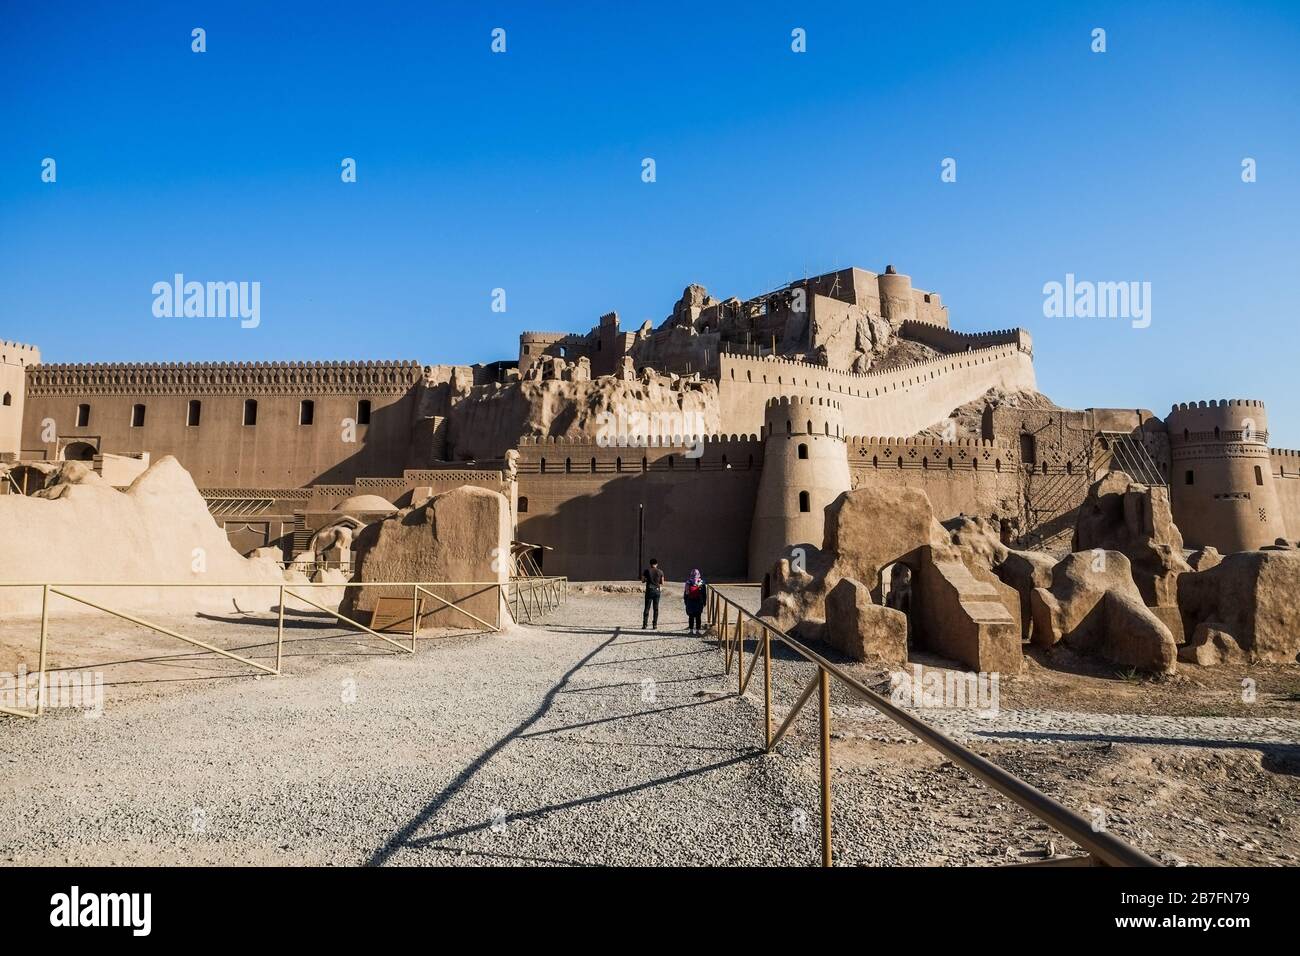 Landscape view of Arg e Bam, ruin and ancient Persian historical site. Famous travel landmark Kerman province, Iran Stock Photo